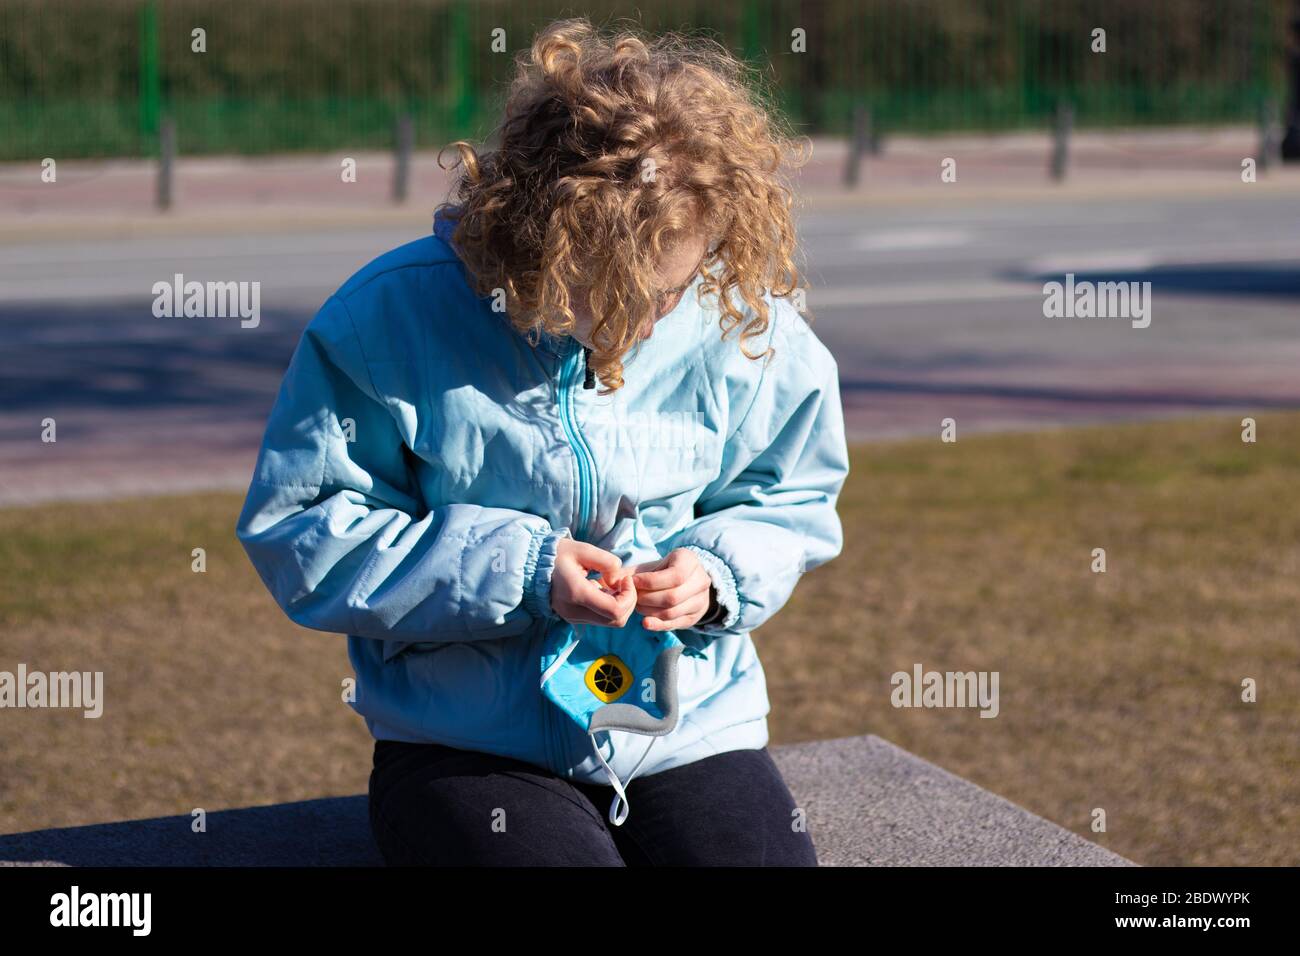 Young girl begins to put on a protective medical respirator on her face. Health protection. Street outdoor photo Stock Photo